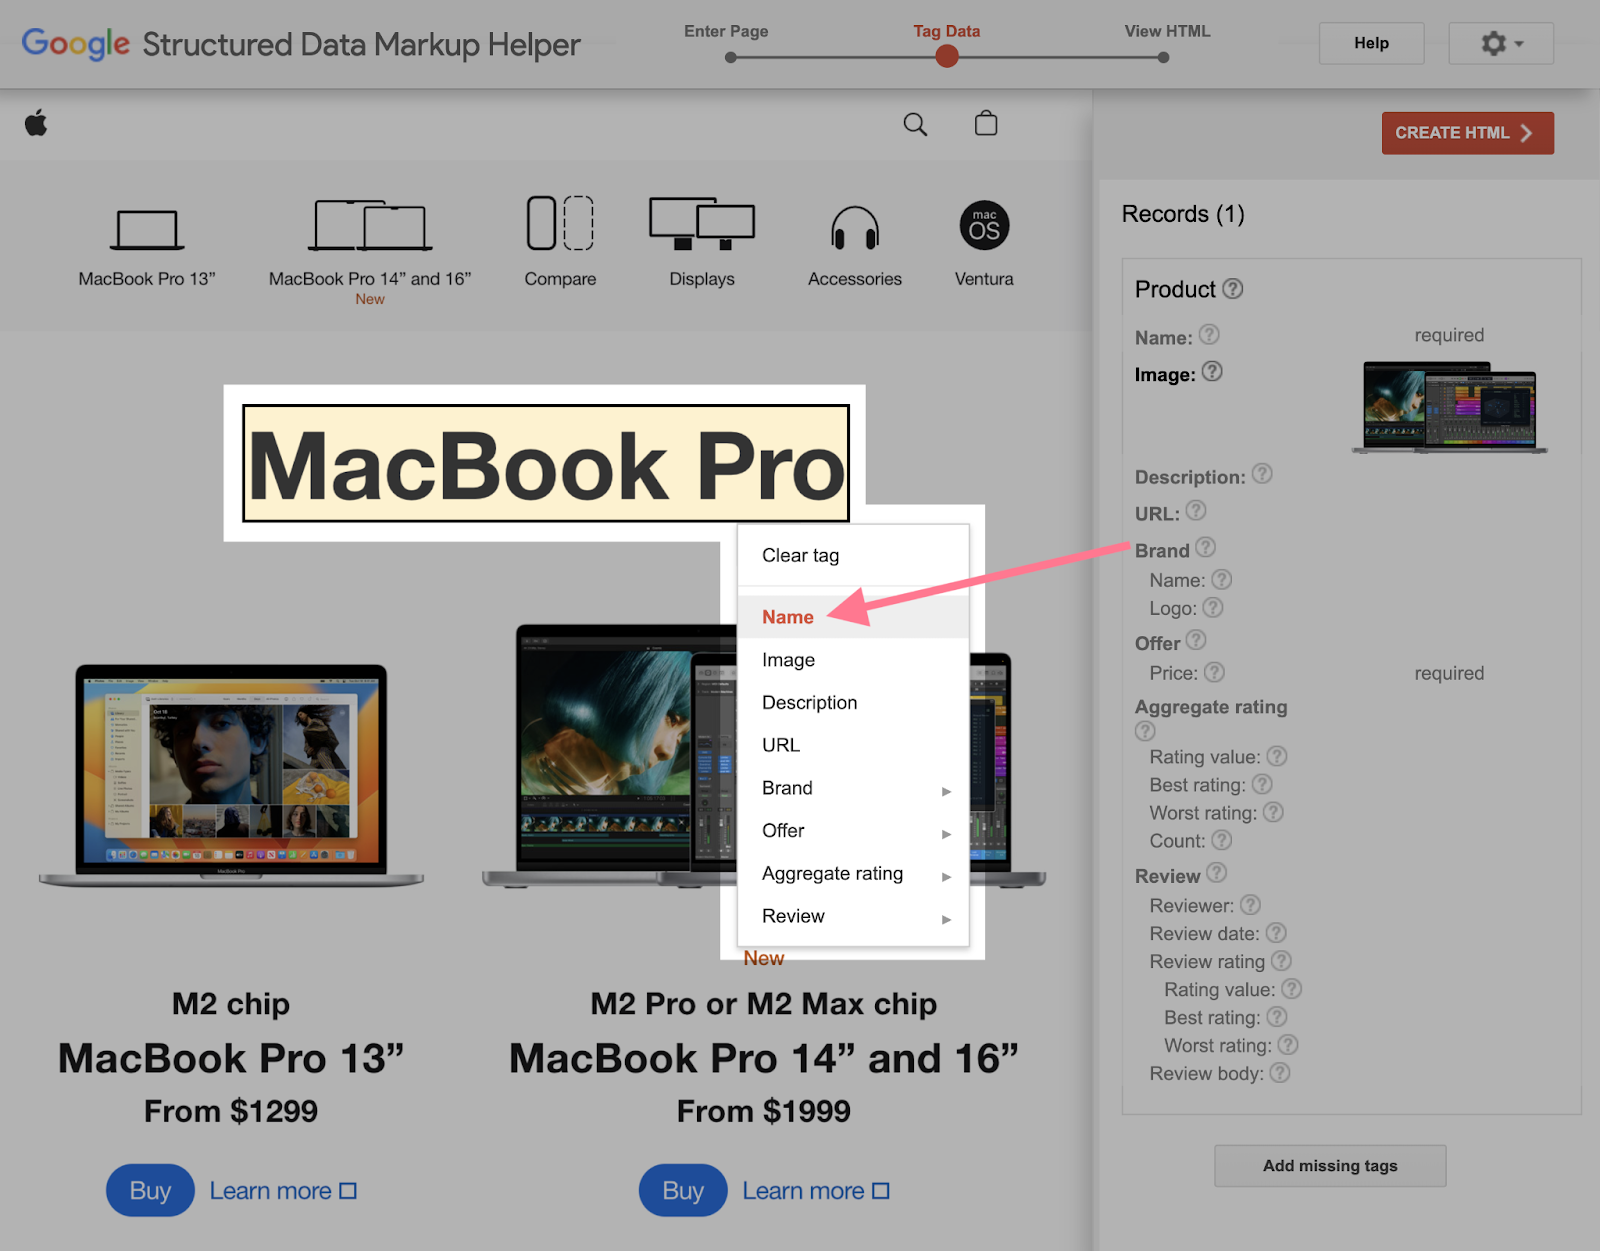 how to add the product’s name to "MacBook Pro" in Structured Data Markup Helper